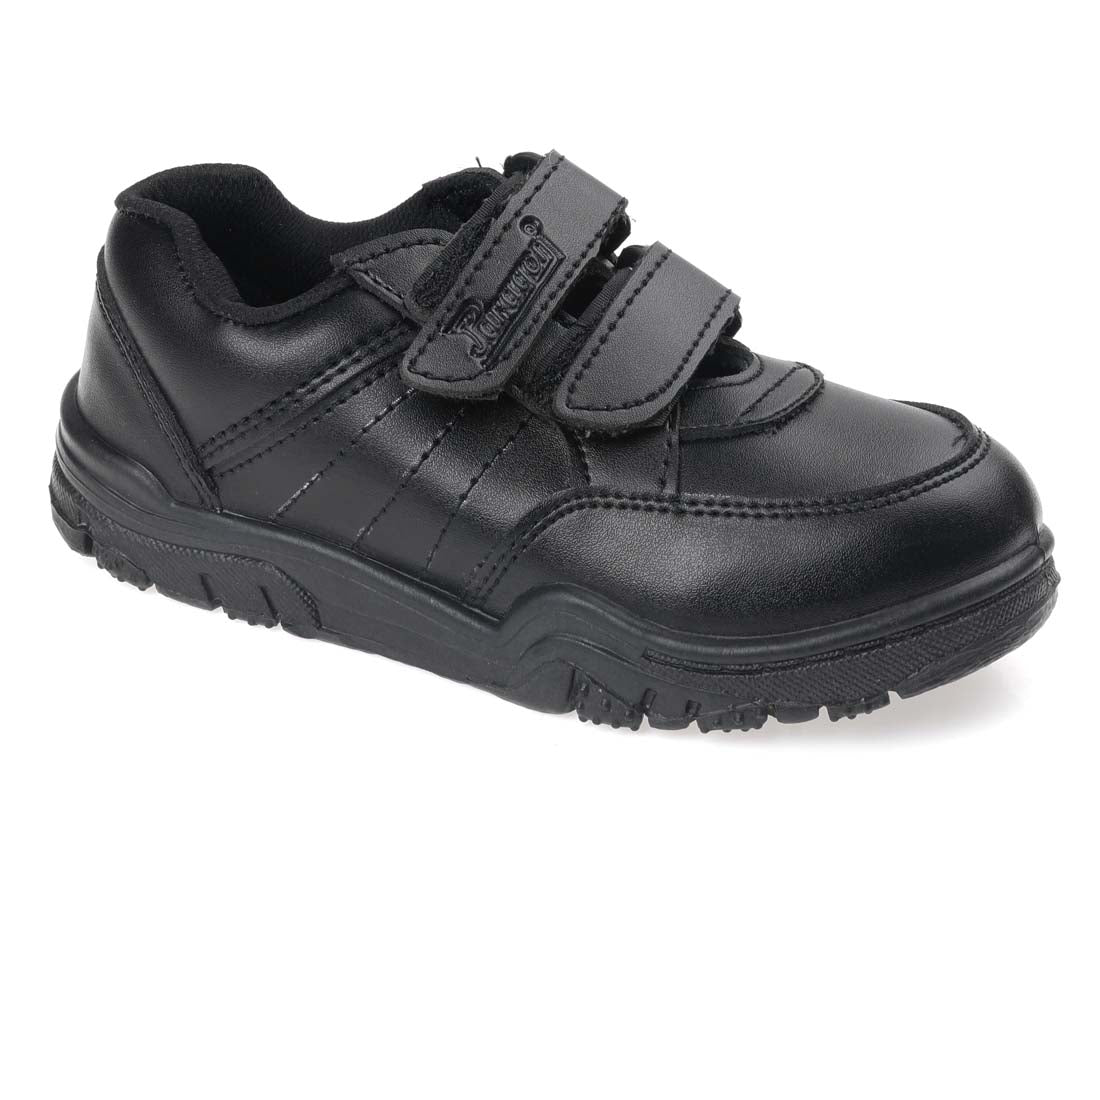 Paragon  PV0026BP Kids Formal School Shoes | Comfortable Cushioned Soles | School Shoes for Boys &amp; Girls